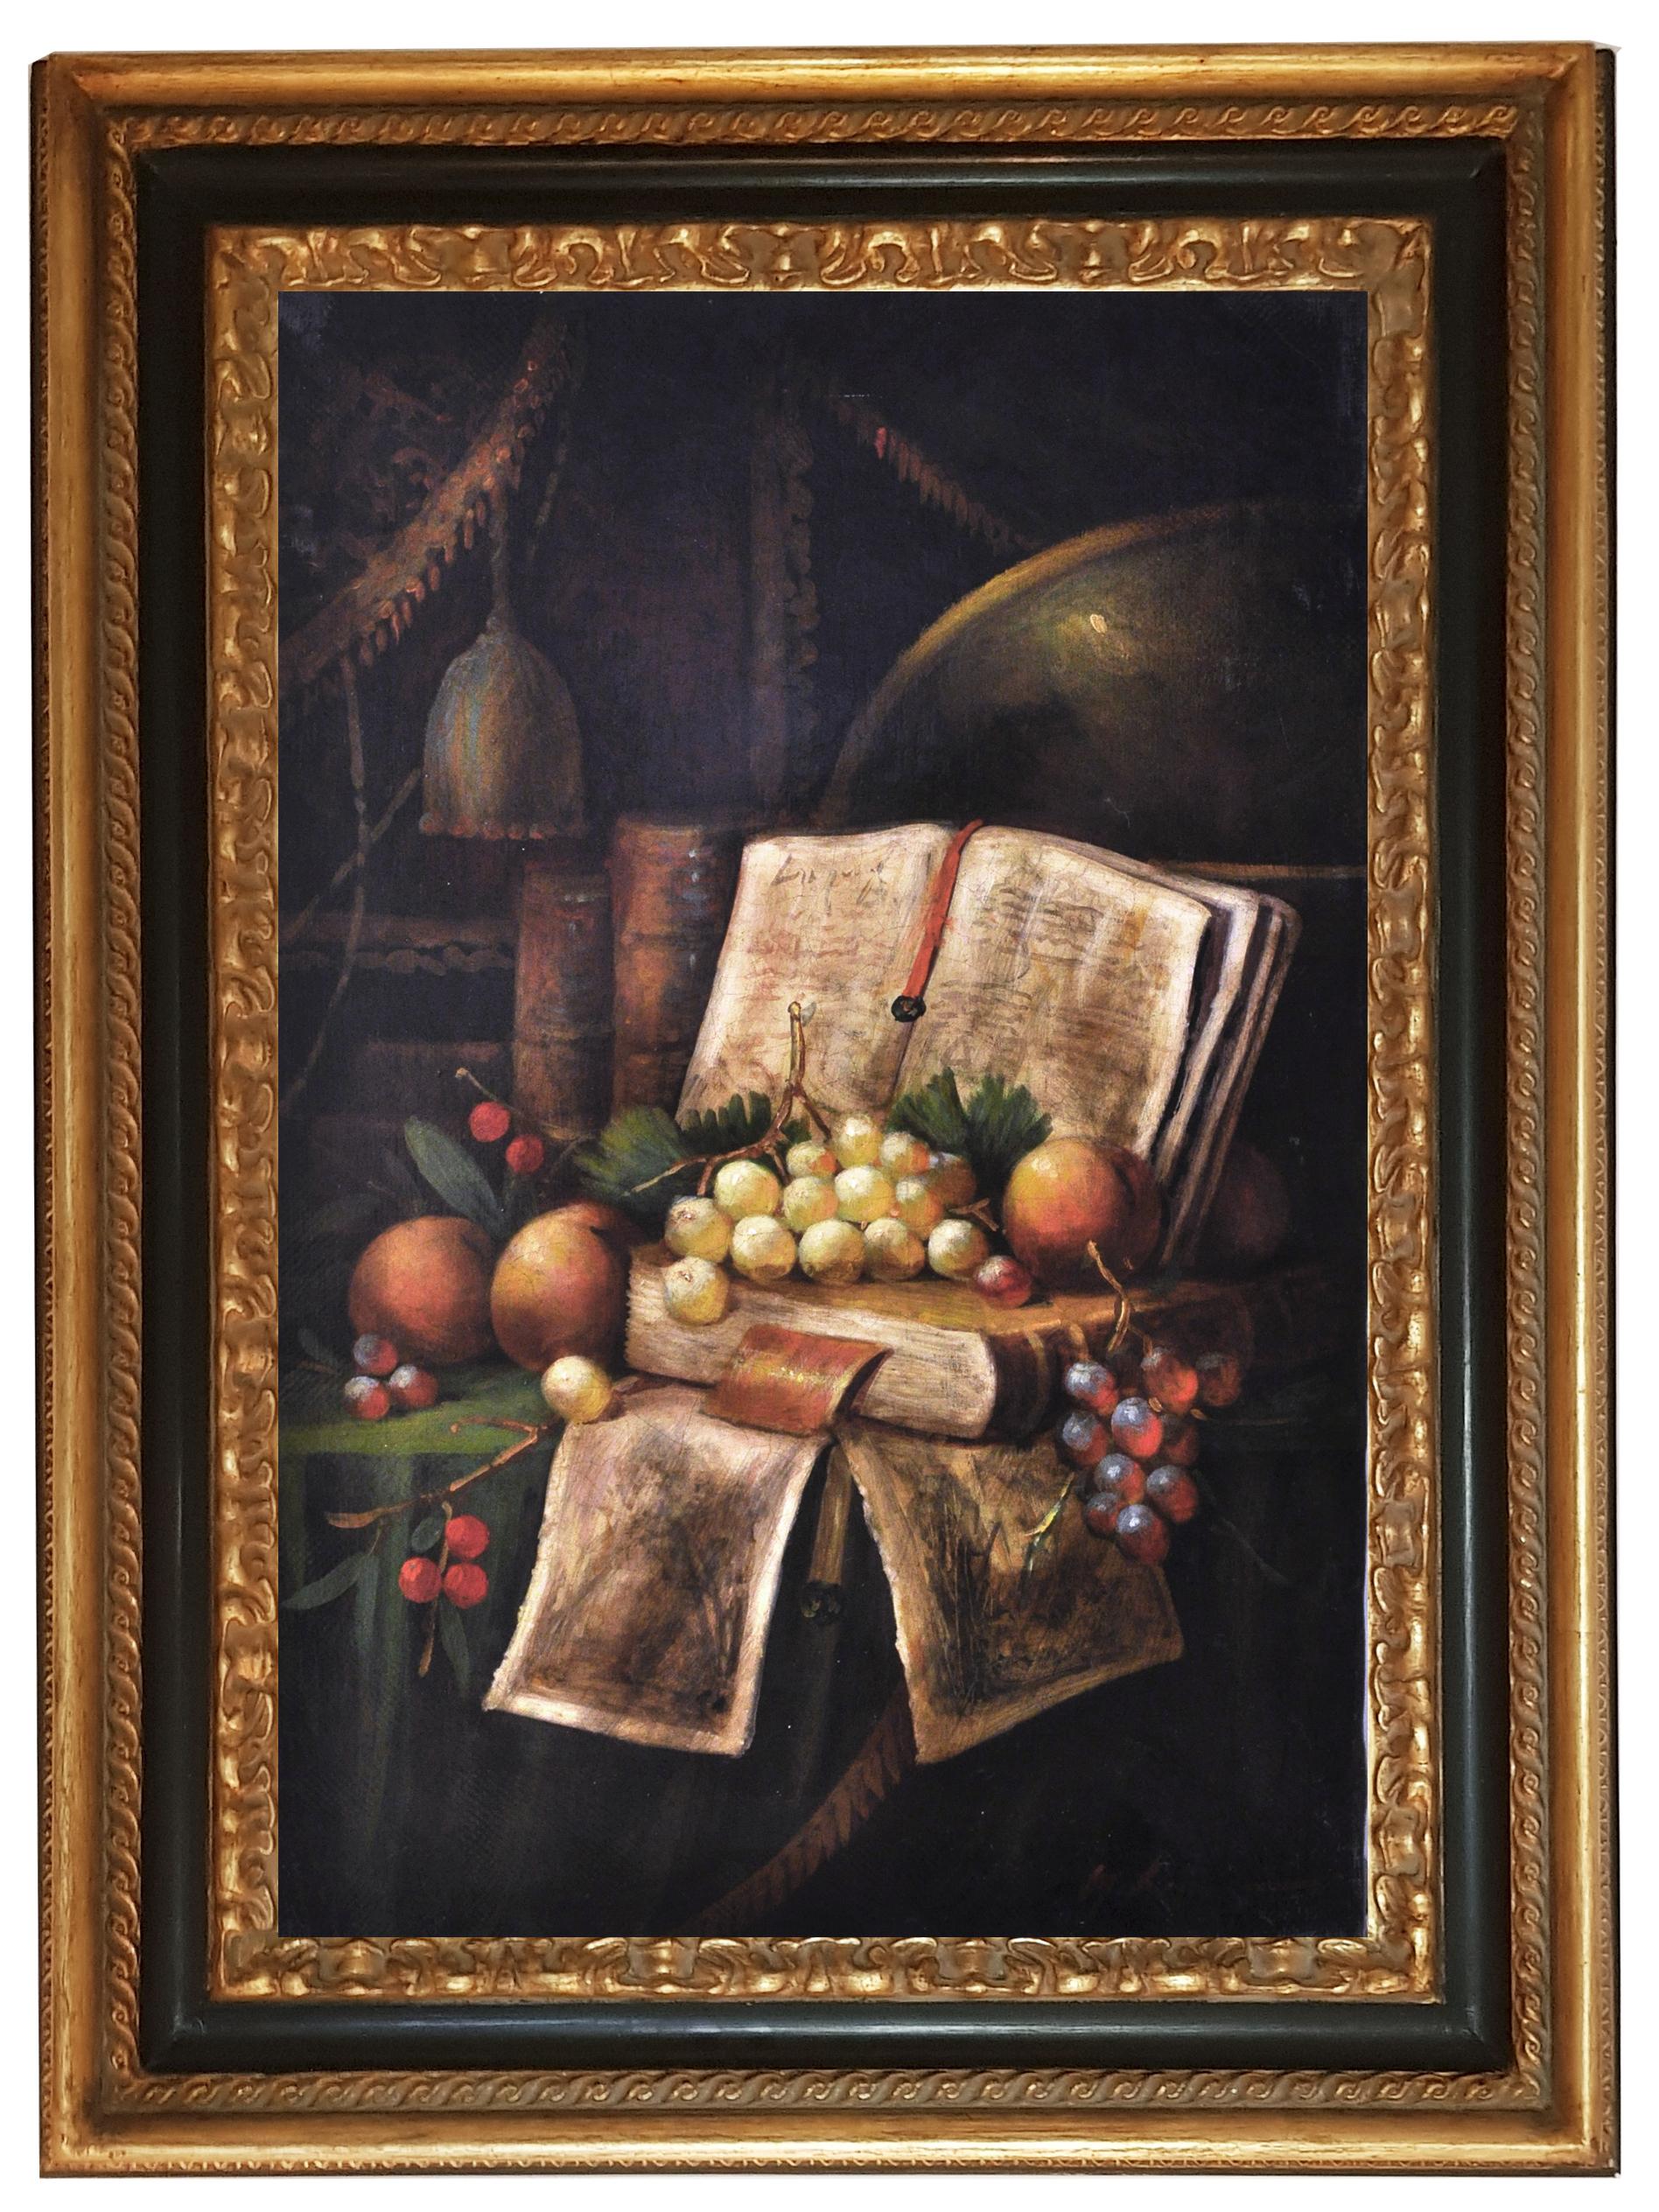 Still life - Massimo Reggiani Italia 2006 - Oil on canvas cm.60x40.
Frame available on request from our workshop.